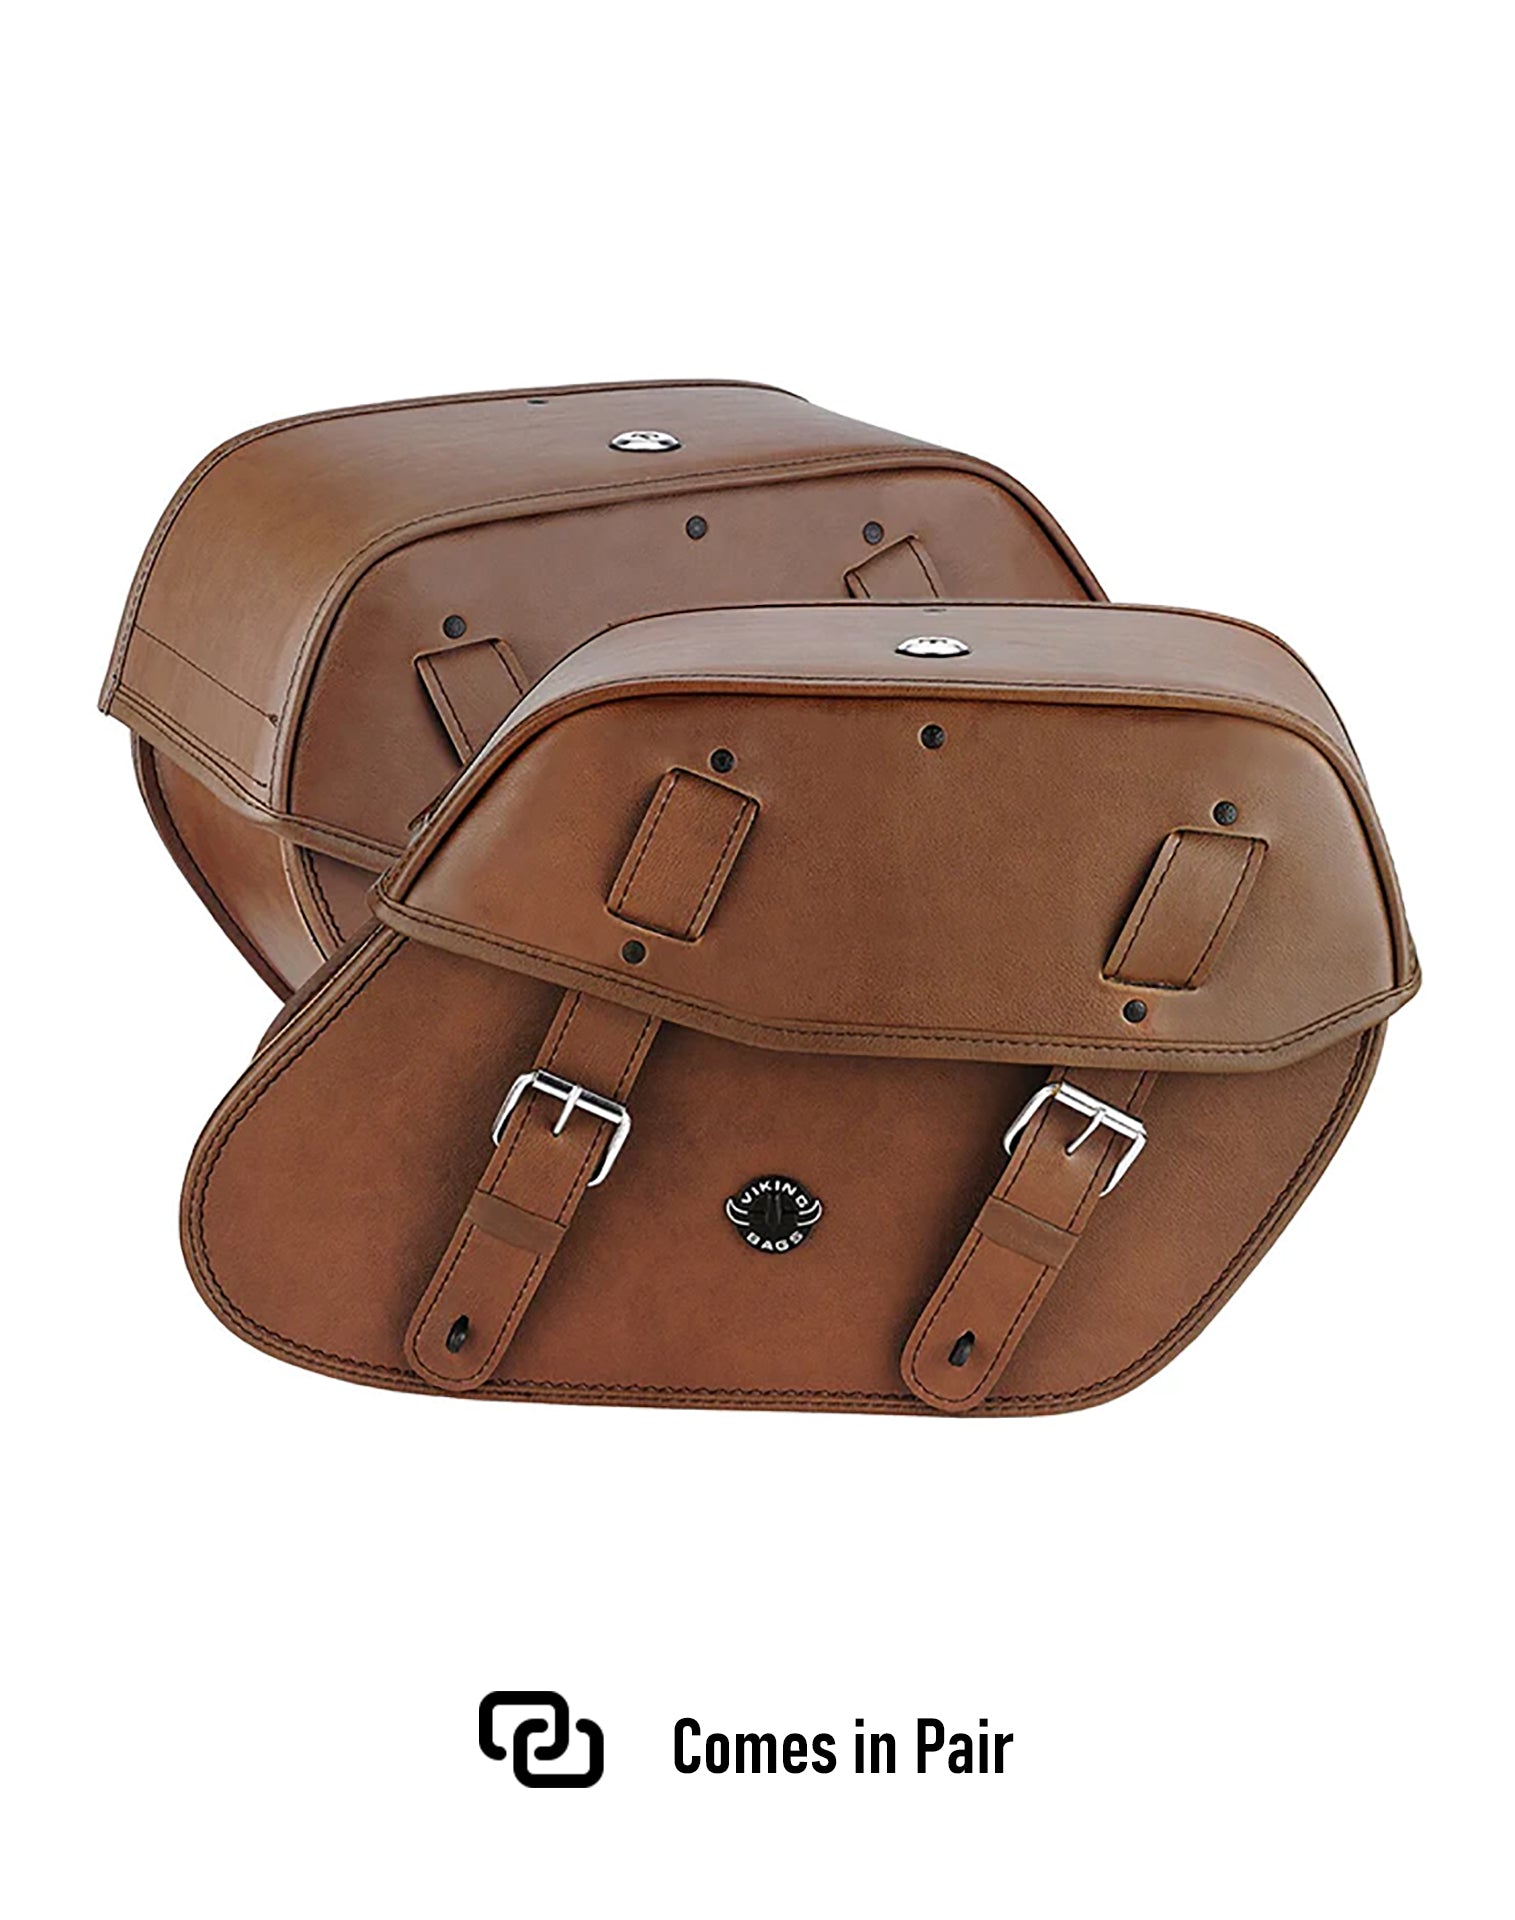 Viking Odin Brown Large Yamaha V Star 1300 Tourer Leather Motorcycle Saddlebags Weather Resistant Bags Comes in Pair